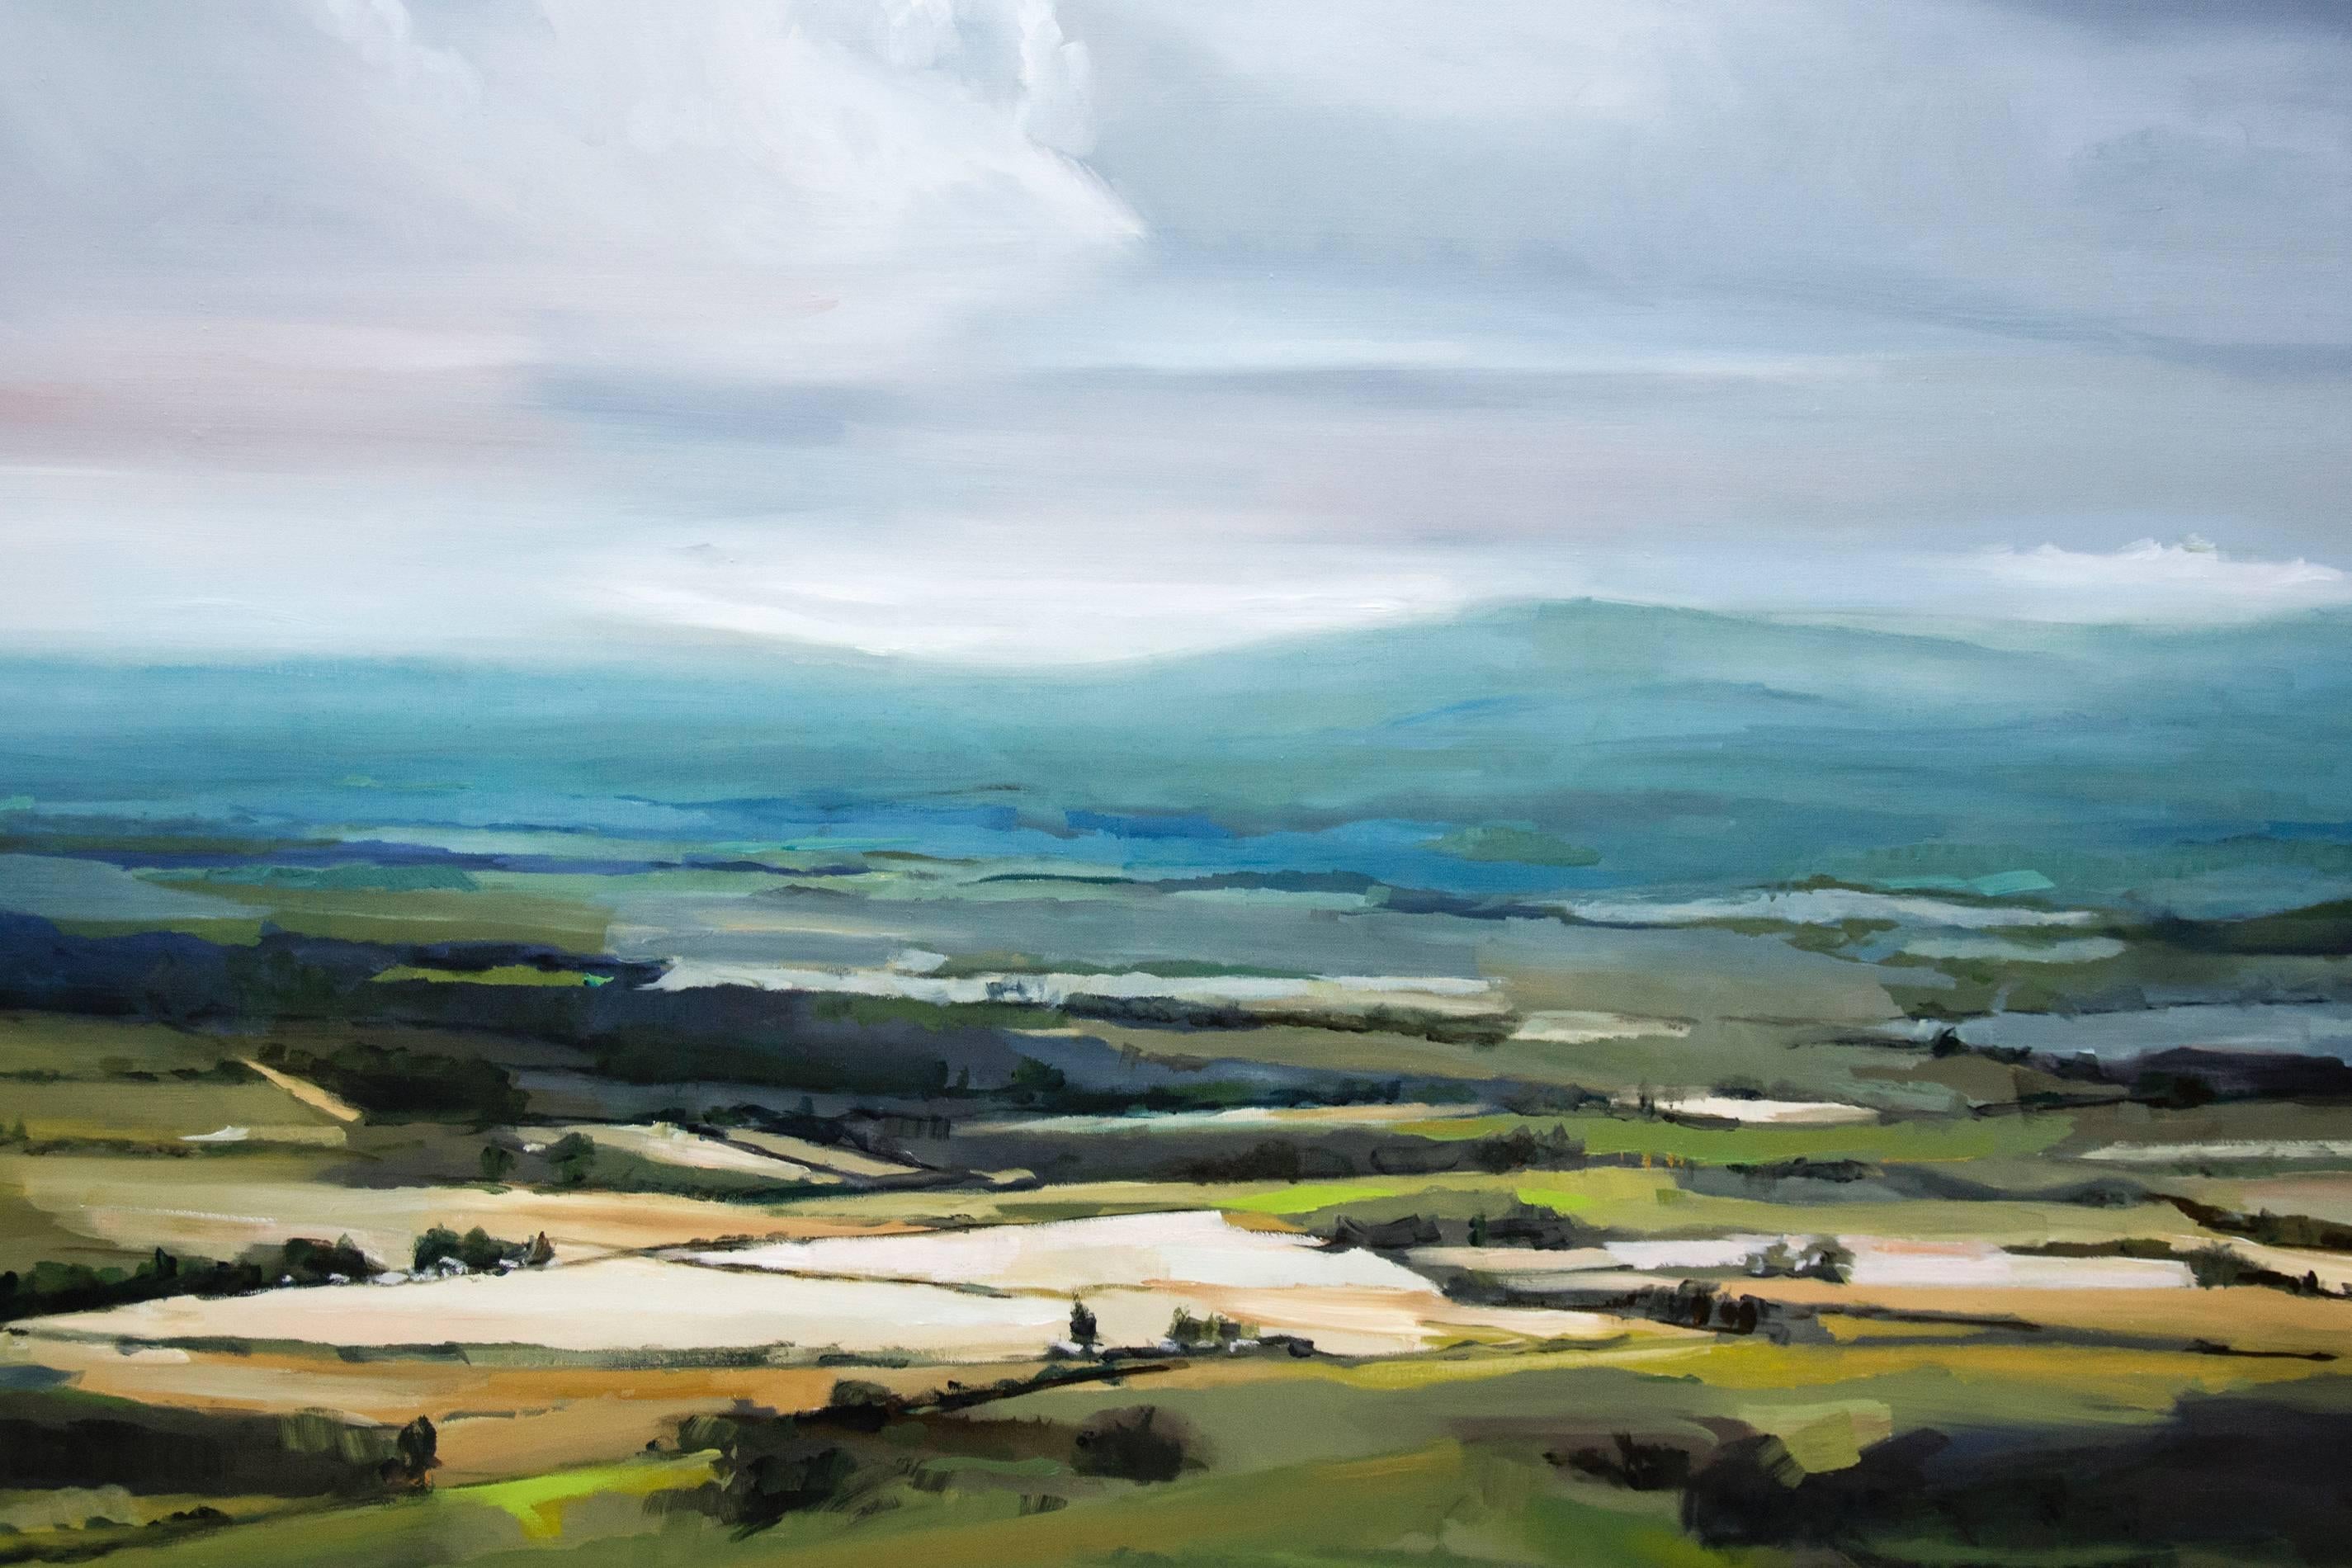 Beautiful landscape painting of a vista across the agricultural valley at the time of day when the light is perfect. The mountains in the distance define the horizon. While the painting feels effortless, it is very skilfully created.

Simon Andrew